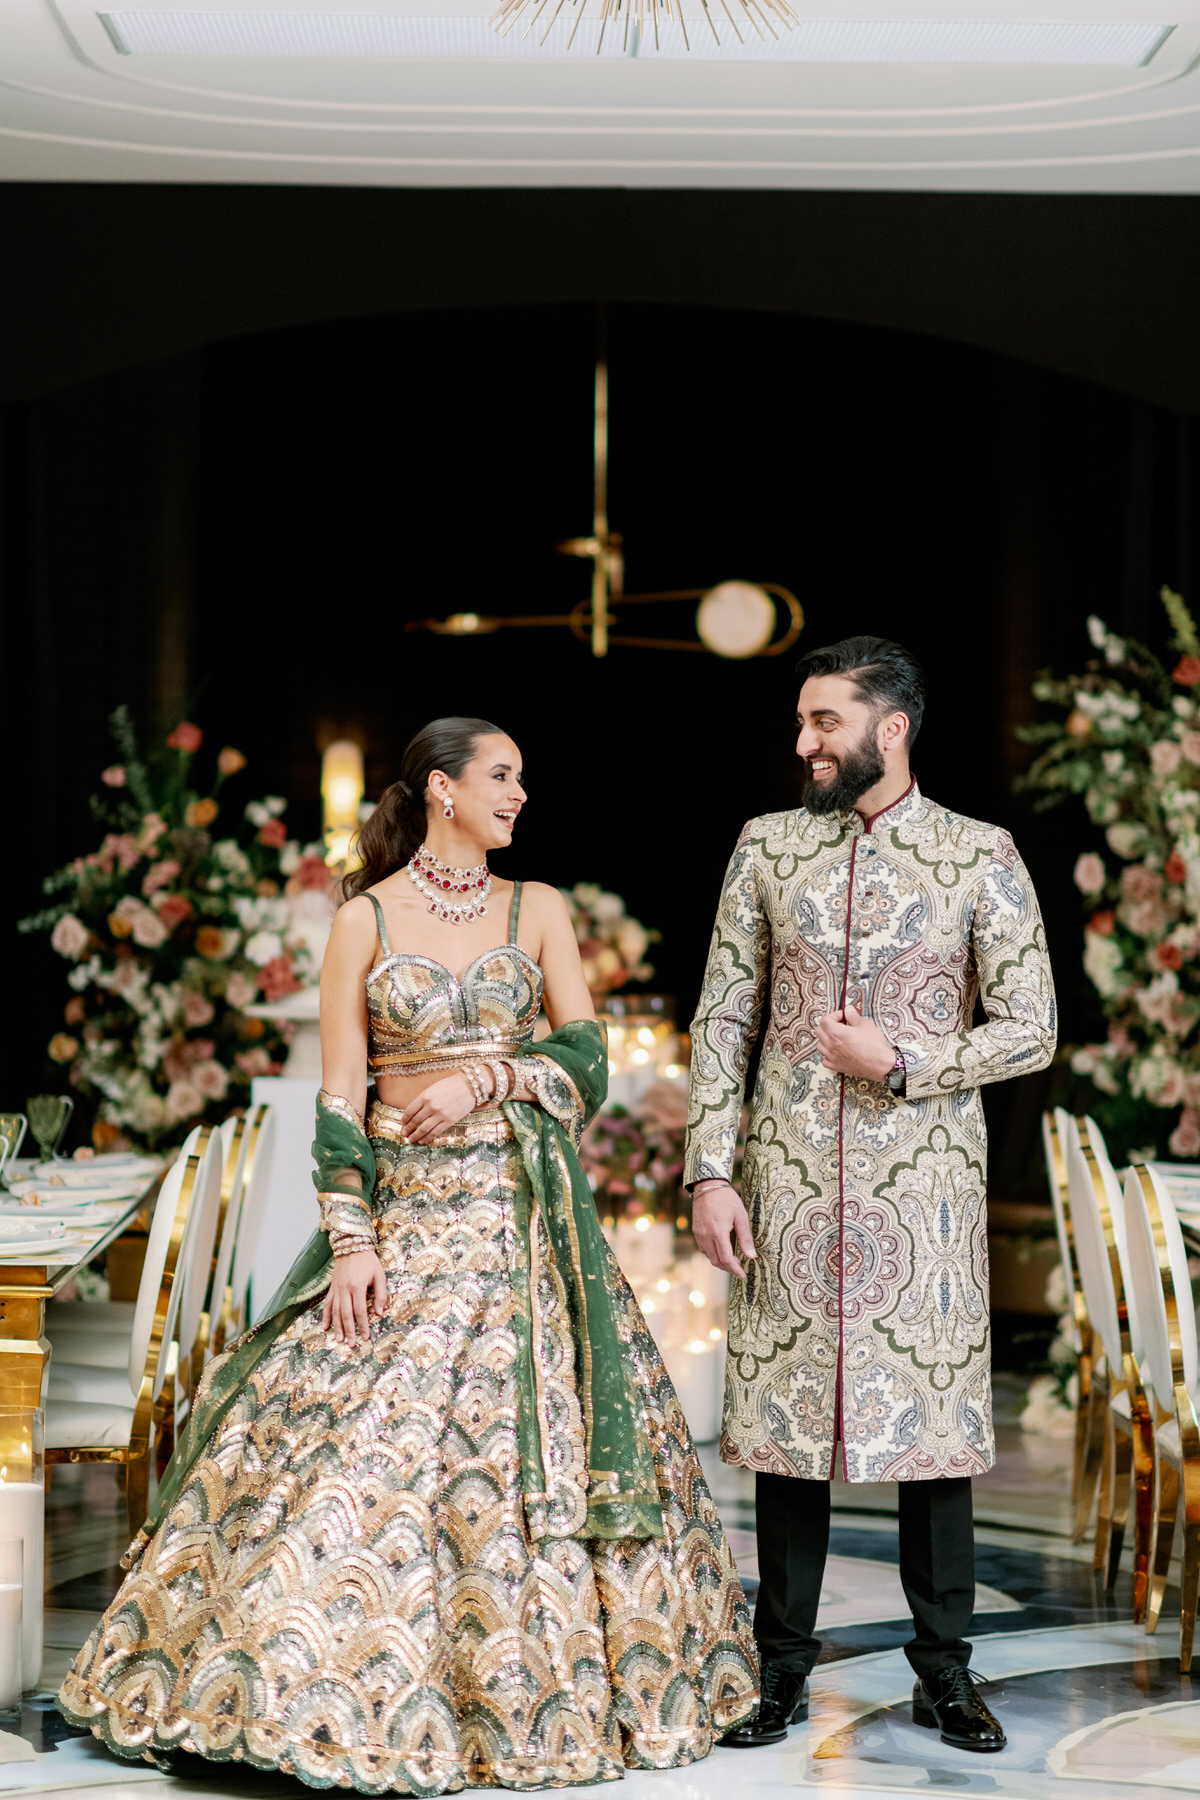 Indian Styled Wedding Blending Cultures & Modern Individuality ⋆ Ruffled